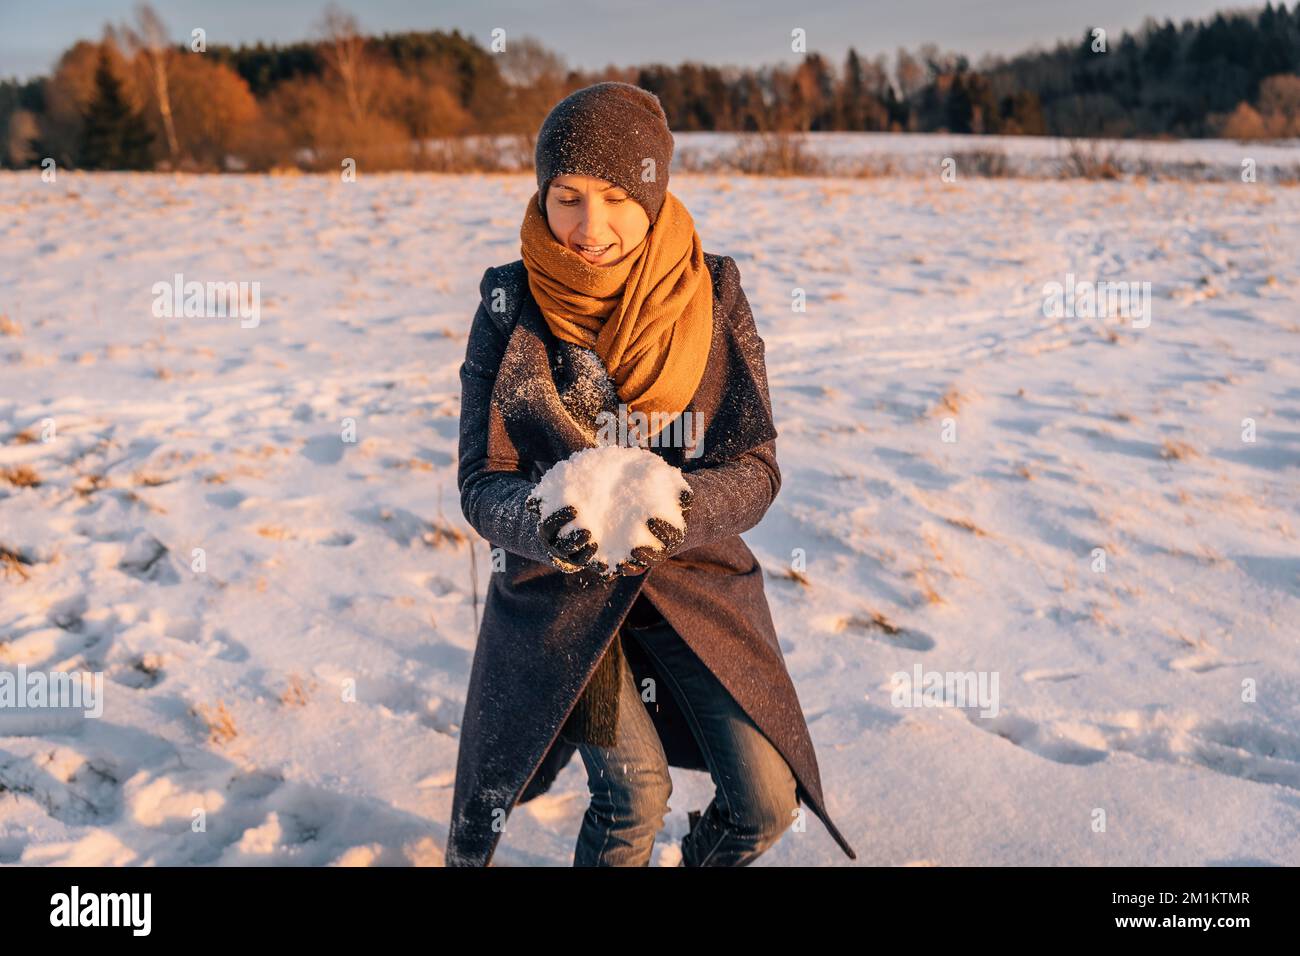 A woman in winter clothes collects a lump of snow in a snow-covered field Stock Photo